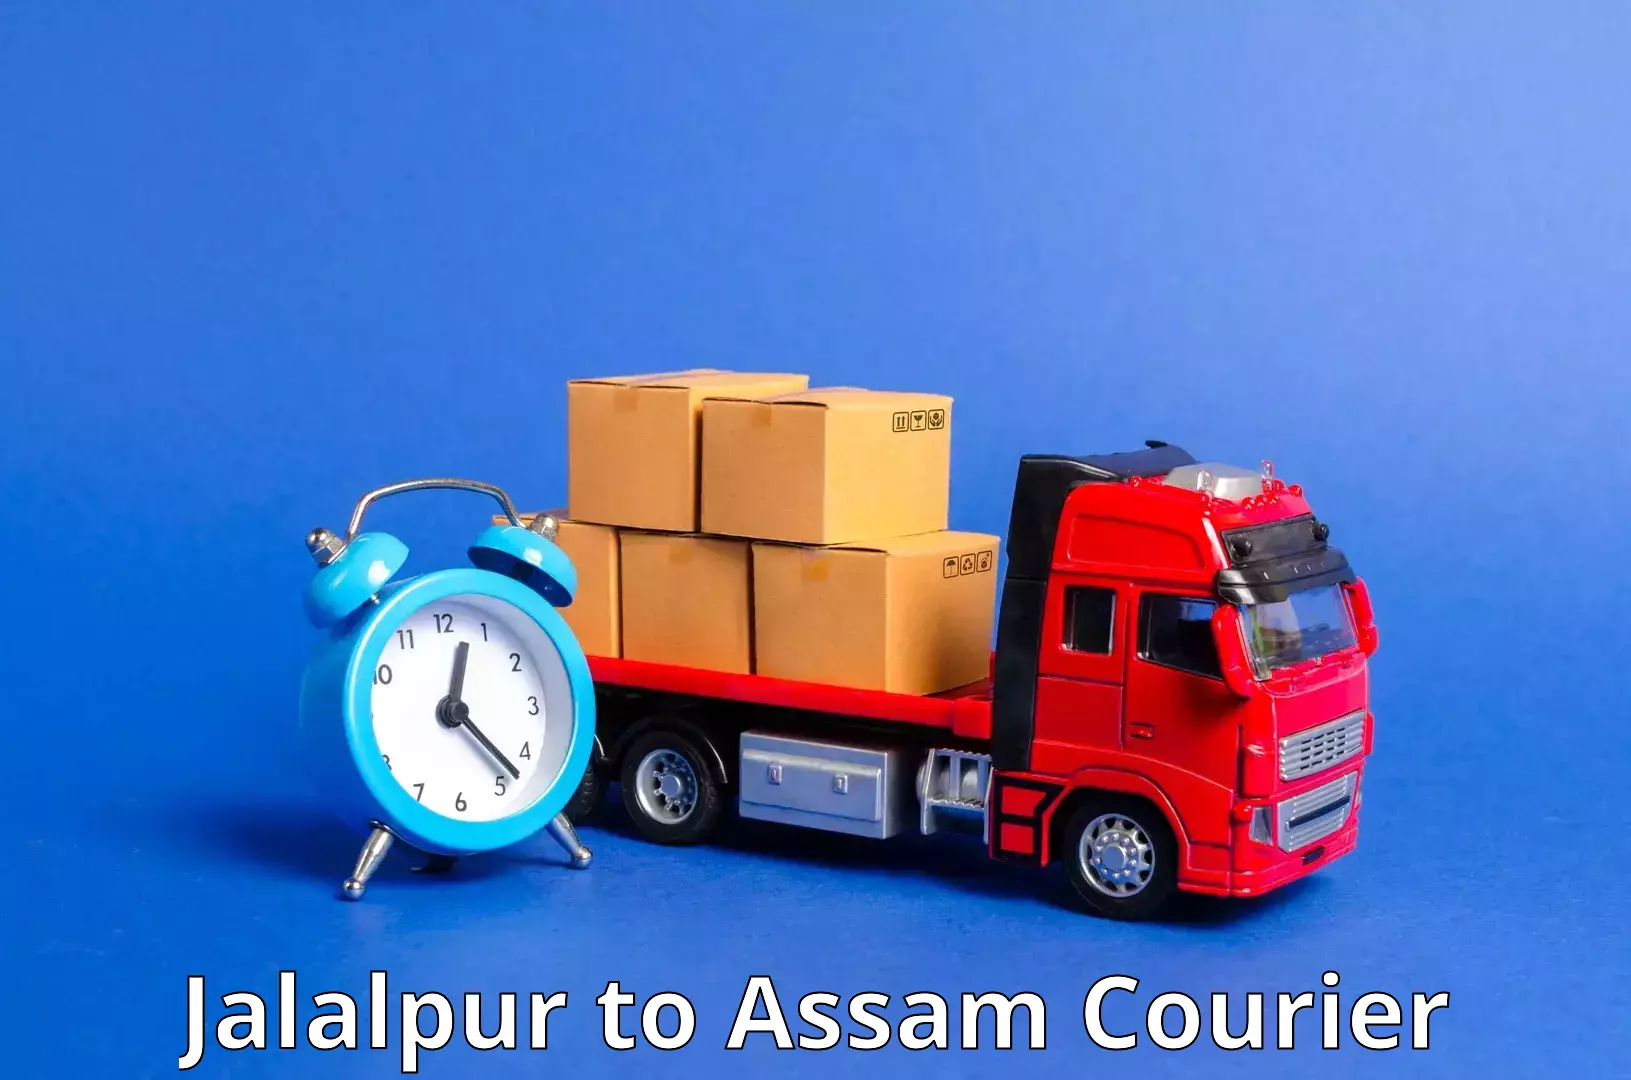 Large-scale shipping solutions Jalalpur to Lala Assam